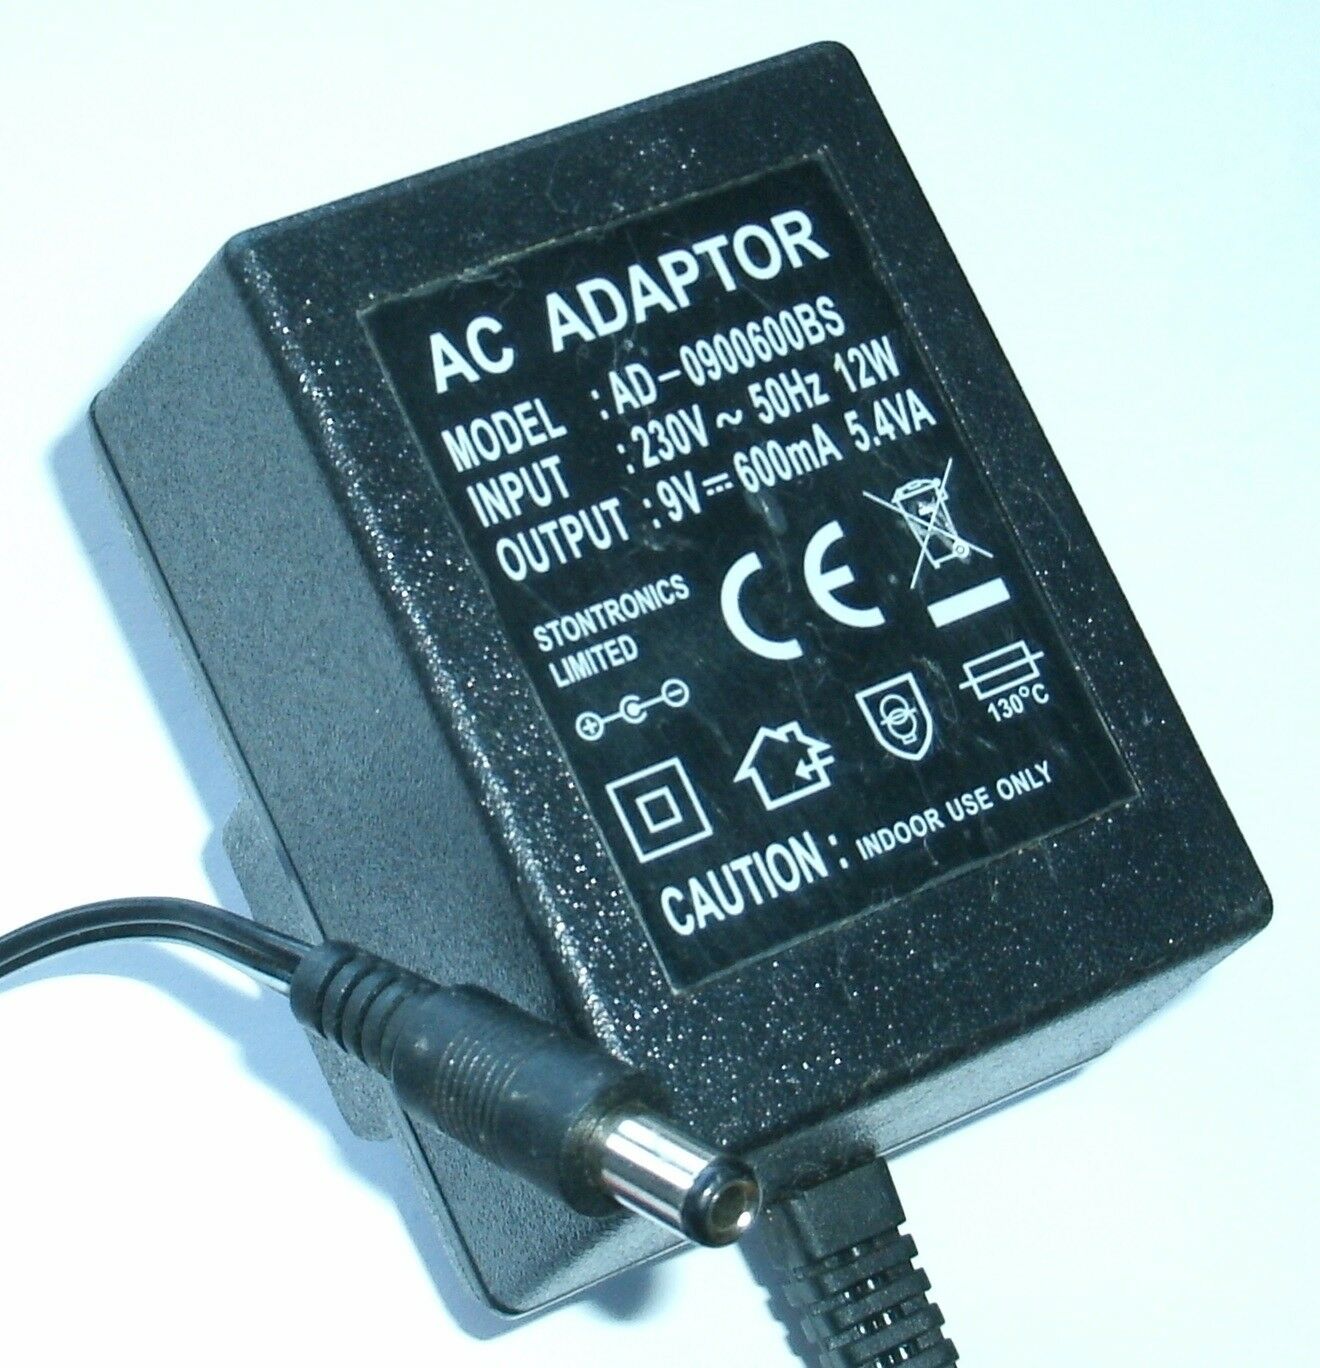 NEW 9V 600mA AD-0900600BS AC ADAPTER